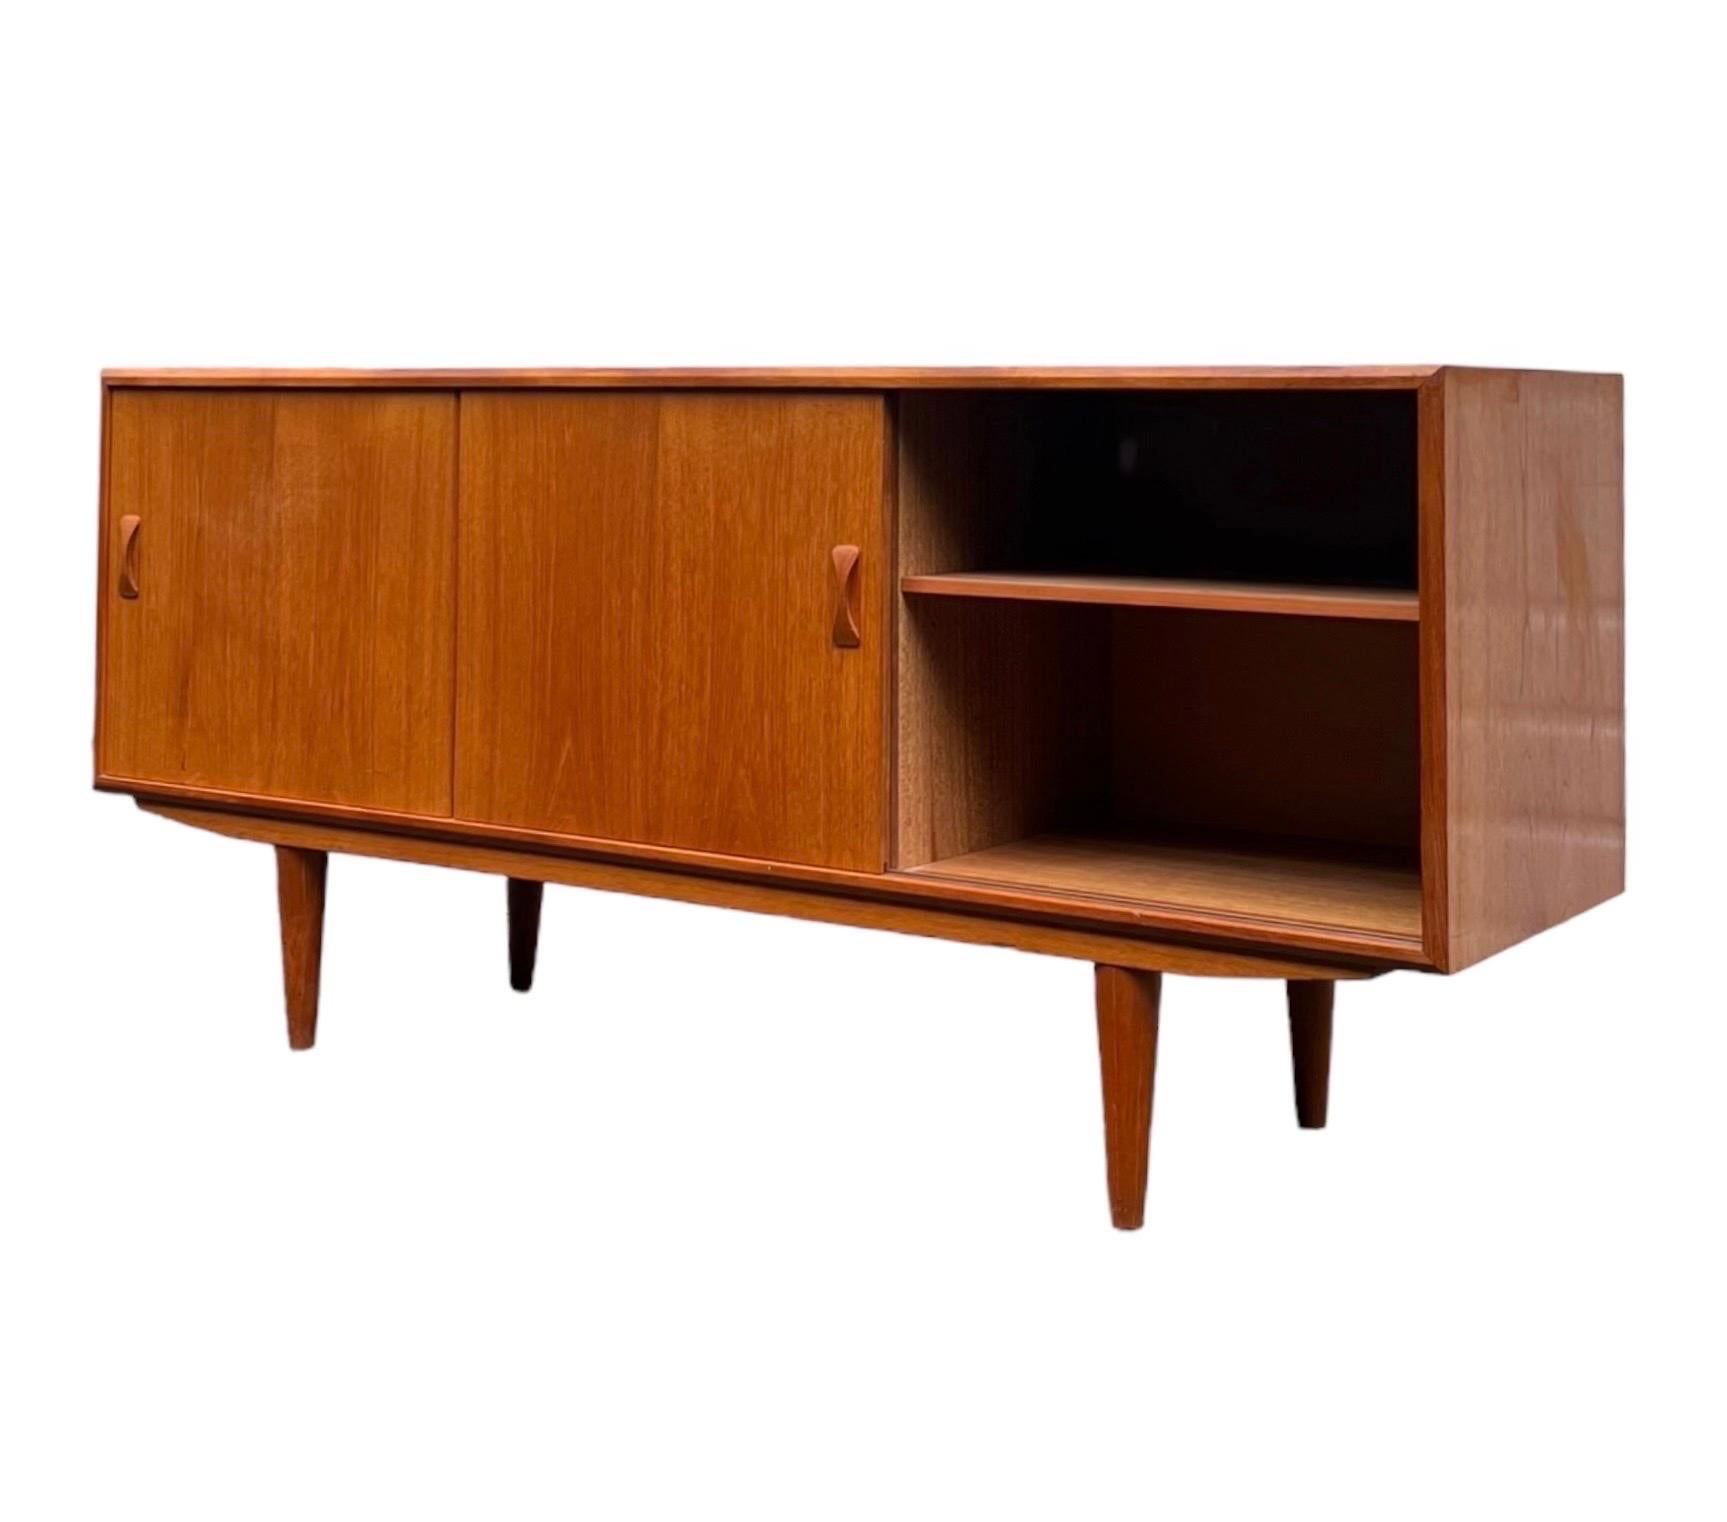 Early 18th Century Vintage Danish Mid-Century Modern Credenza by Clausen and Sons Dovetail Drawers For Sale